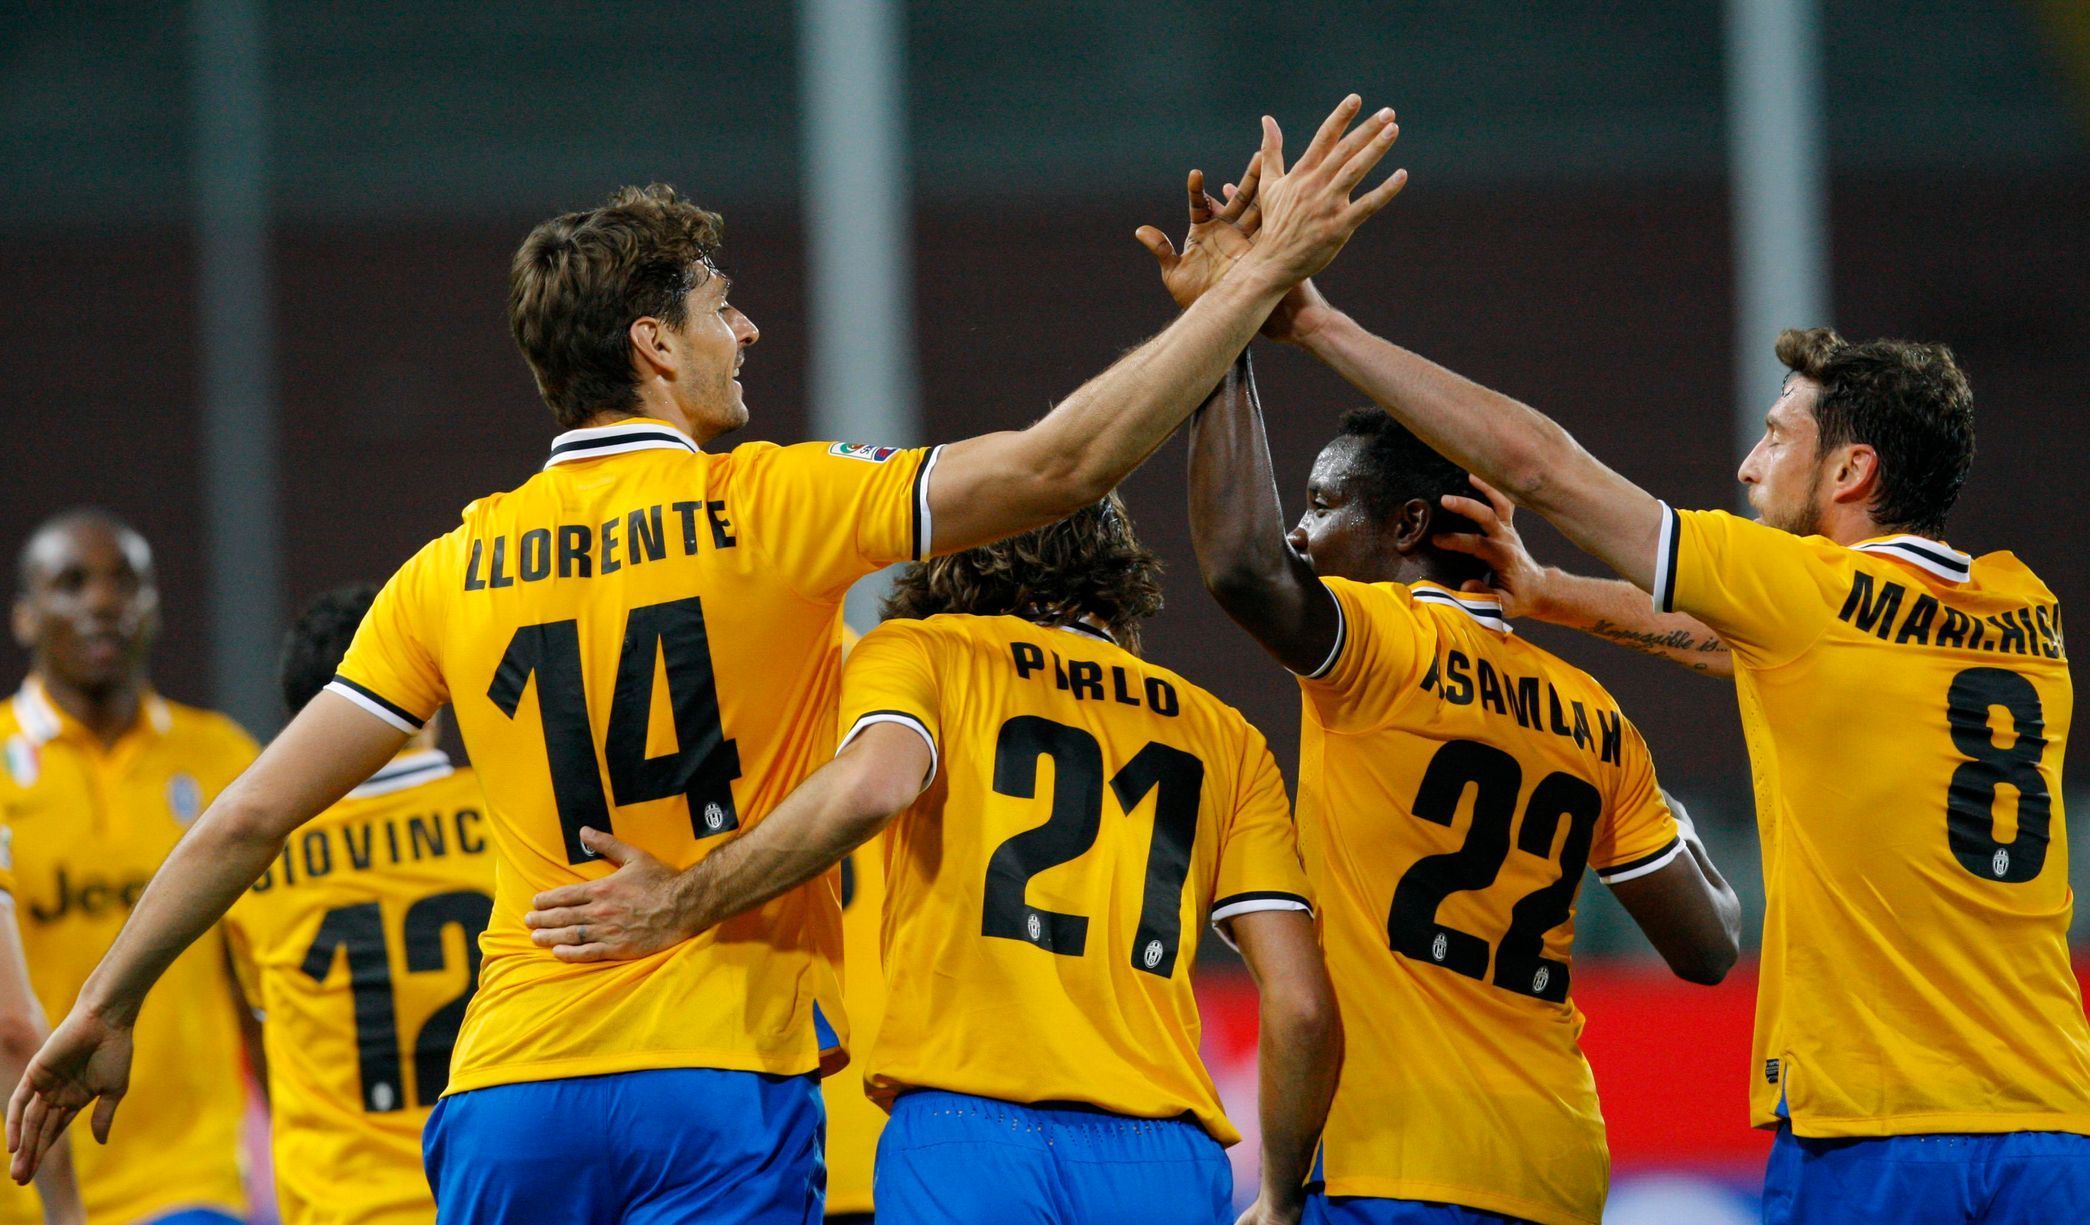 Juventus' Llorente celebrates with his team mates Pirlo, Asamoah and Marchisio, after scoring a goal against Udineseduring their Italian Serie A soccer match in Udine